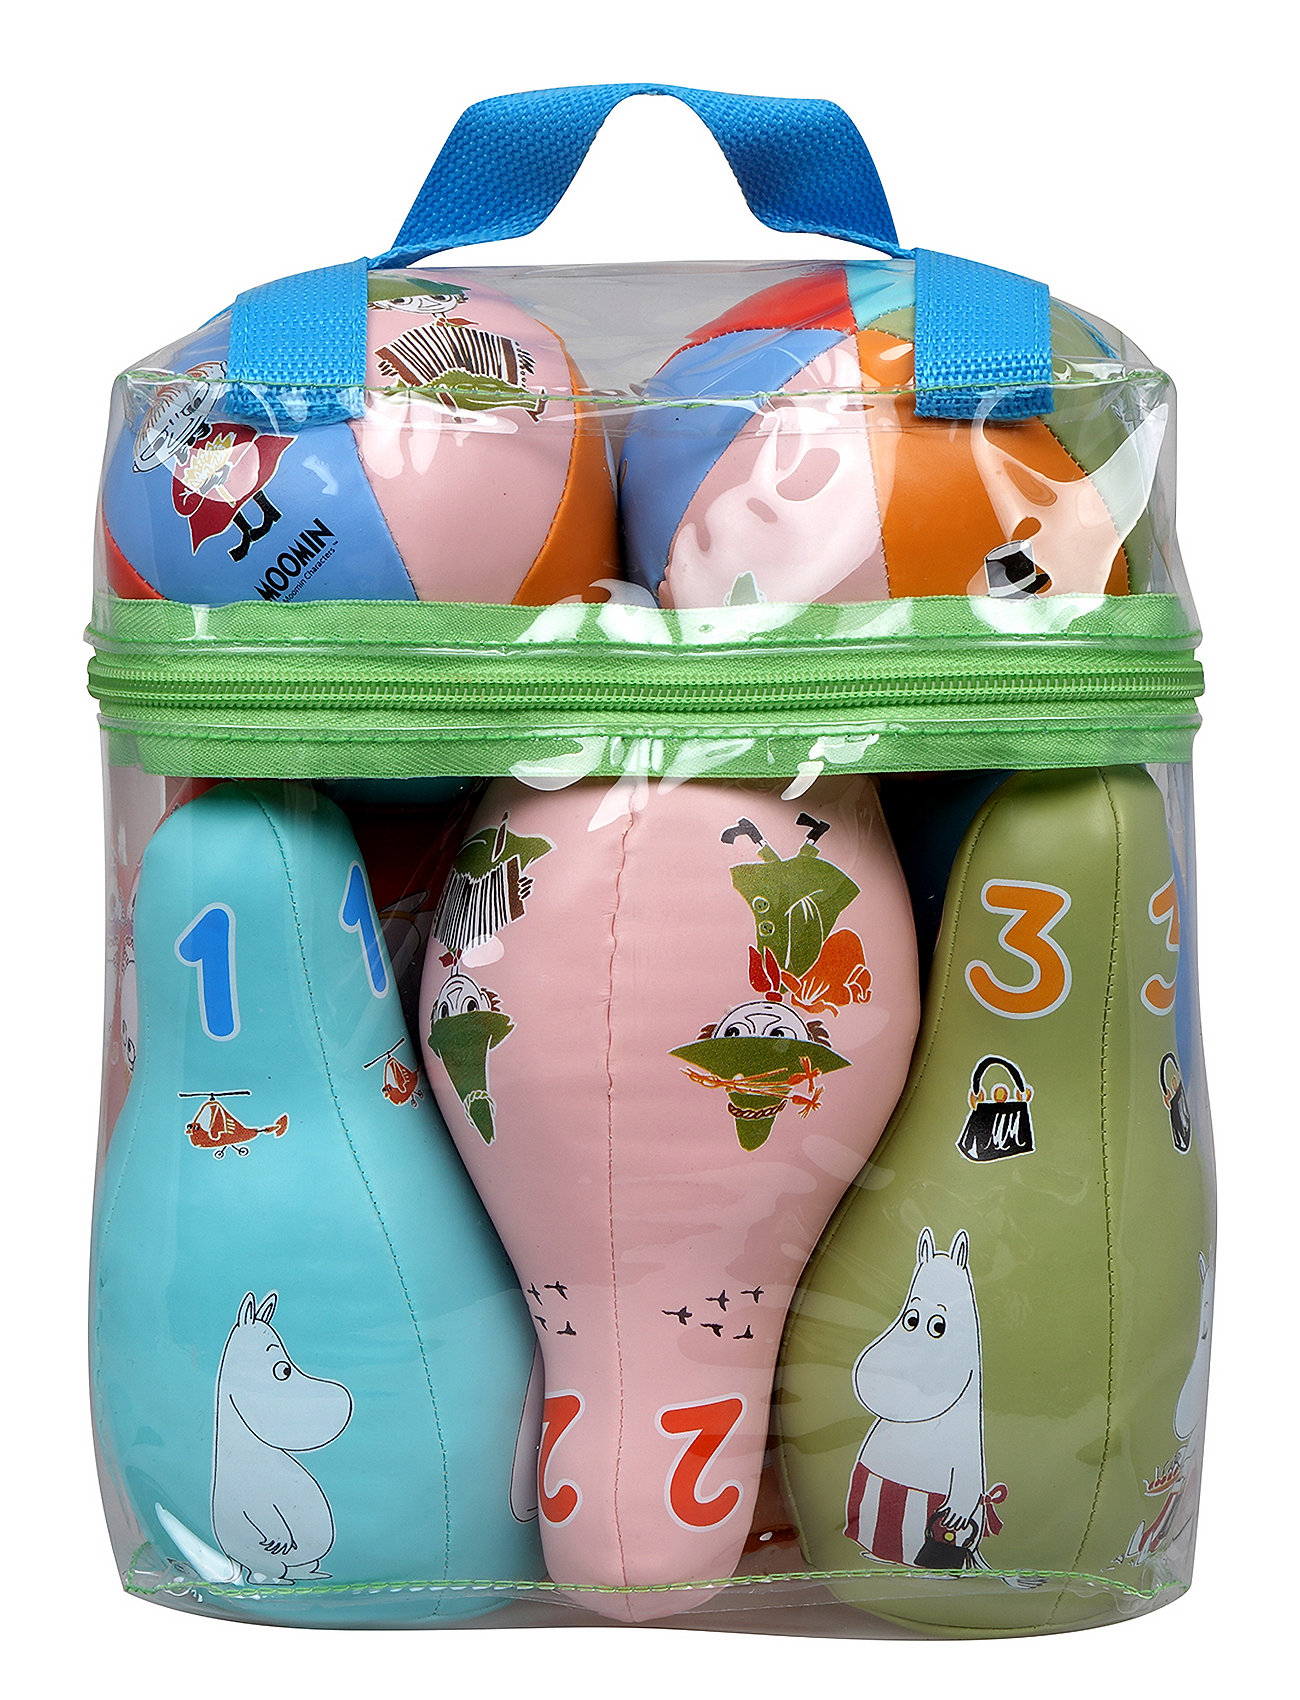 Mumutrolden Soft Bowlingsæt Toys Puzzles And Games Games Active Games Multi/patterned MUMIN